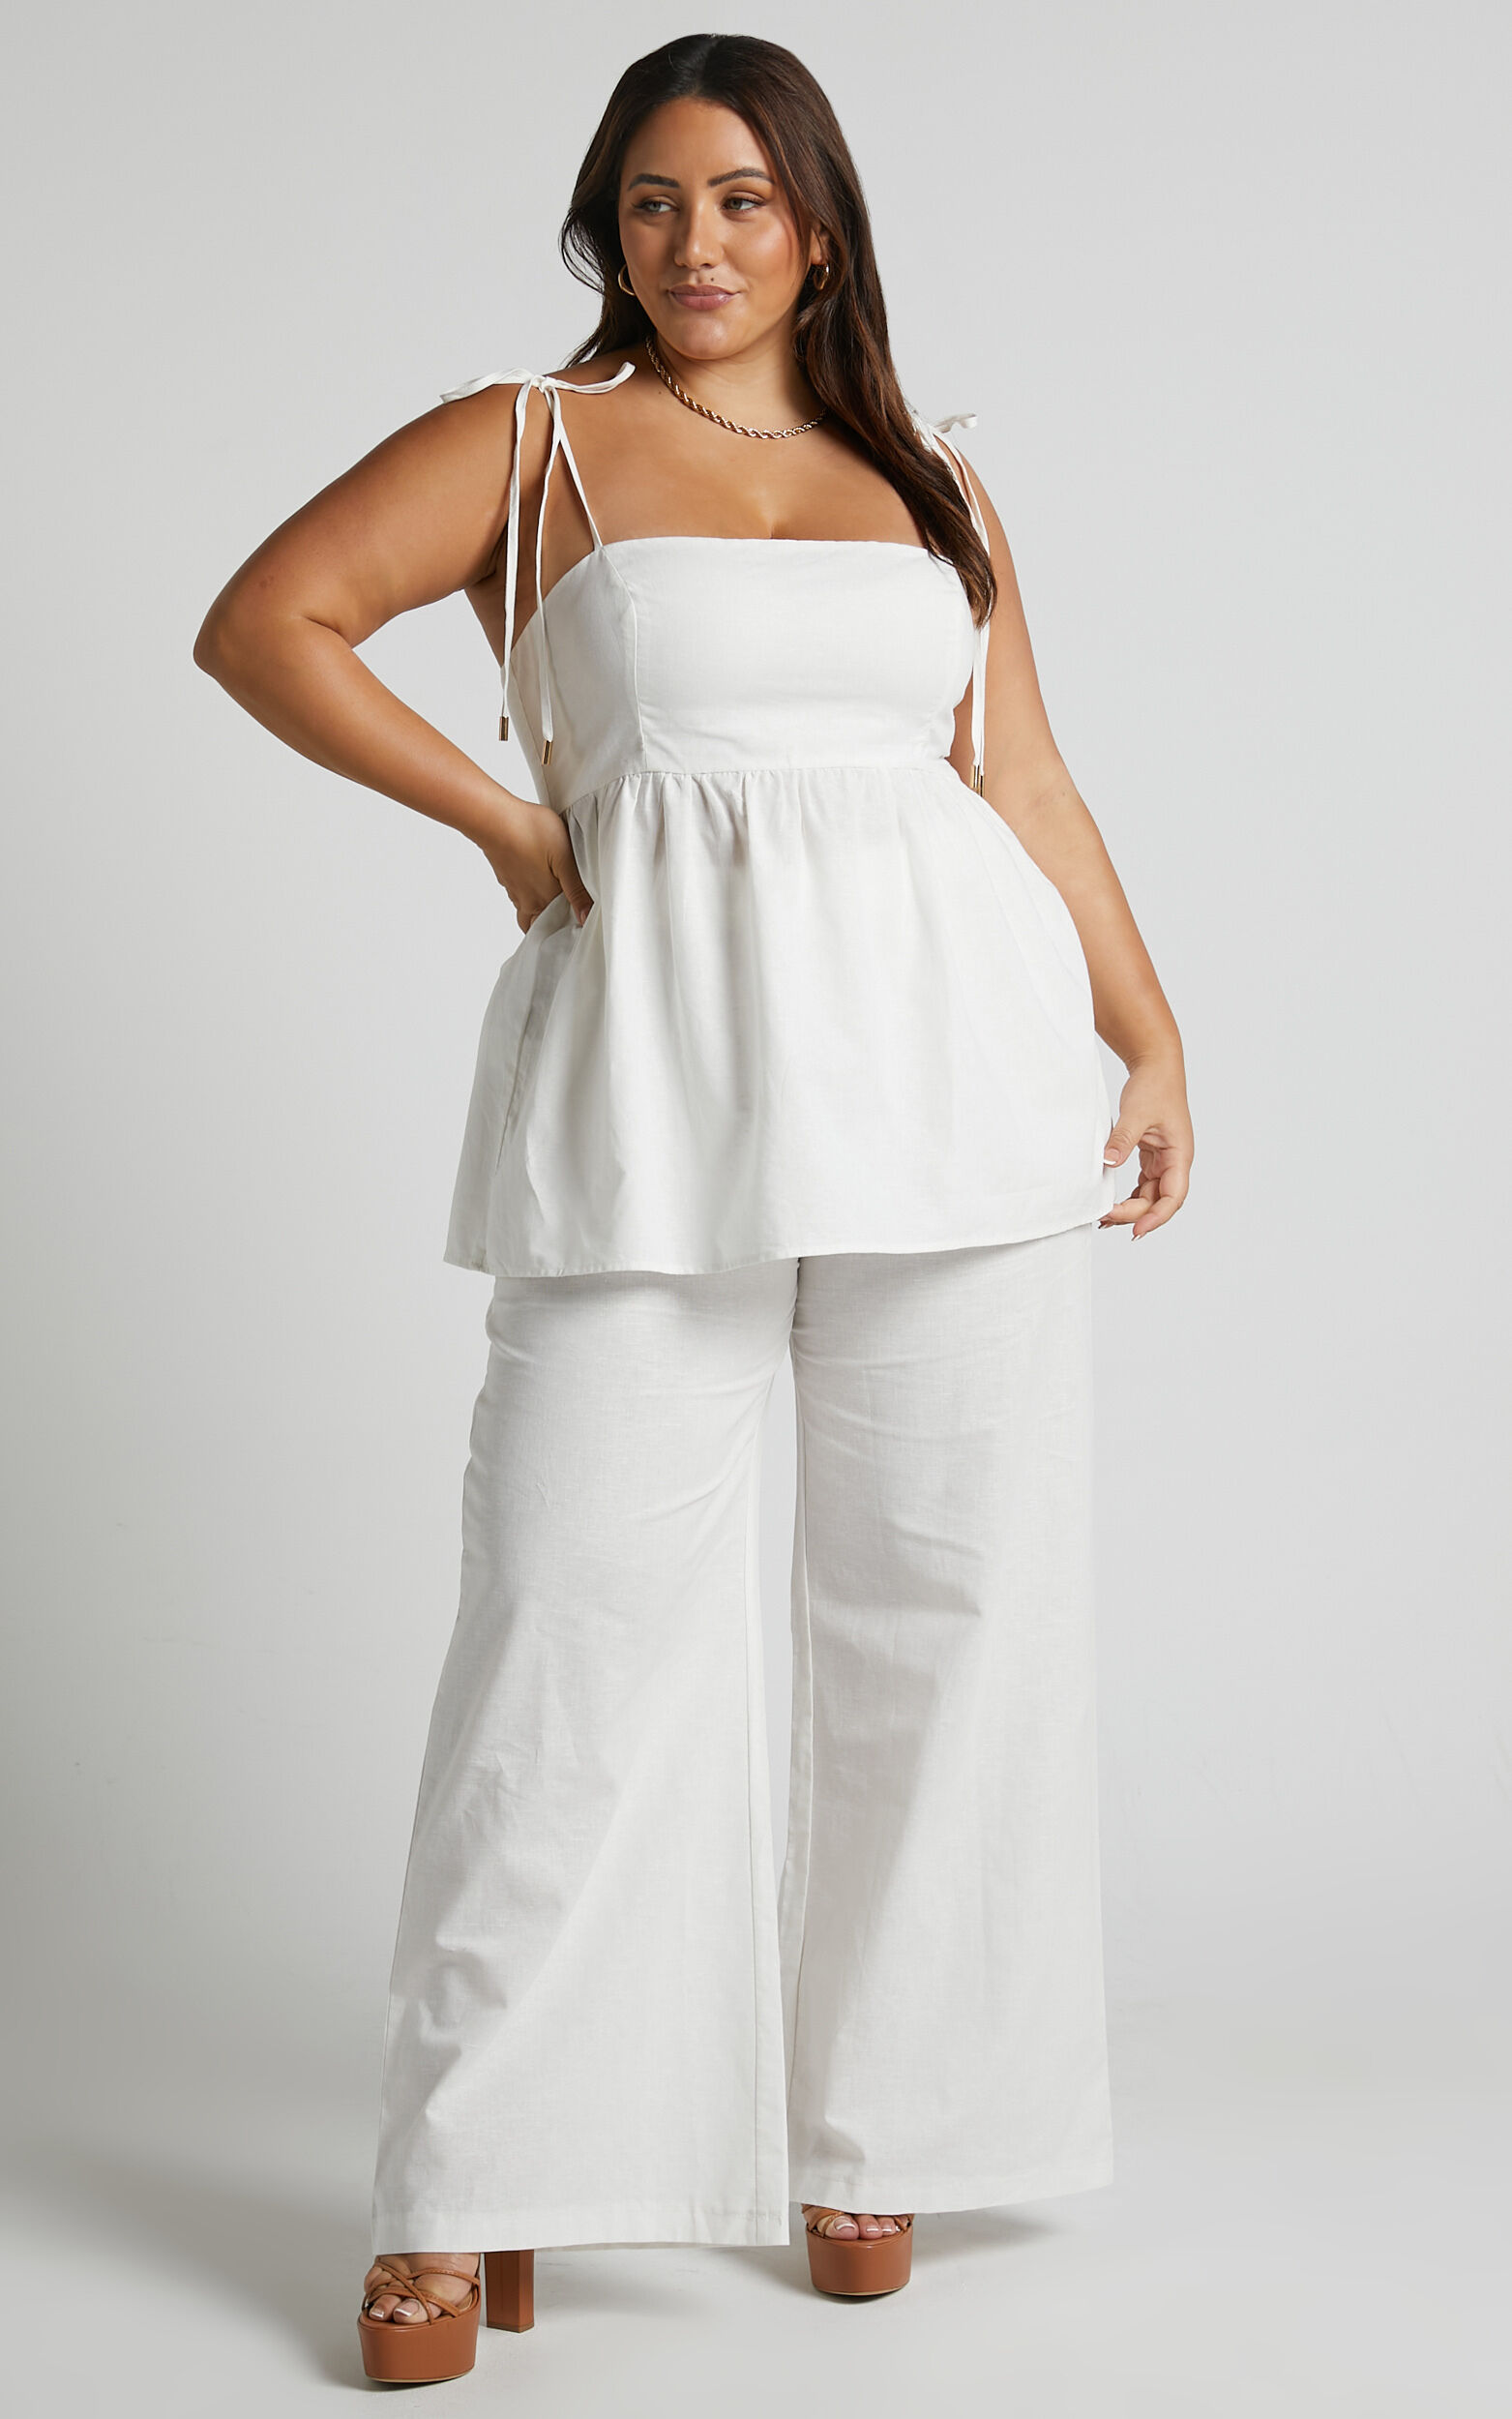 Buy Plus Size 2 Piece Outfits for Women Elegant 3/4 Sleeve Solid Peplum Tops  Wide Pants Casual Suit Sets, White, X-Large at